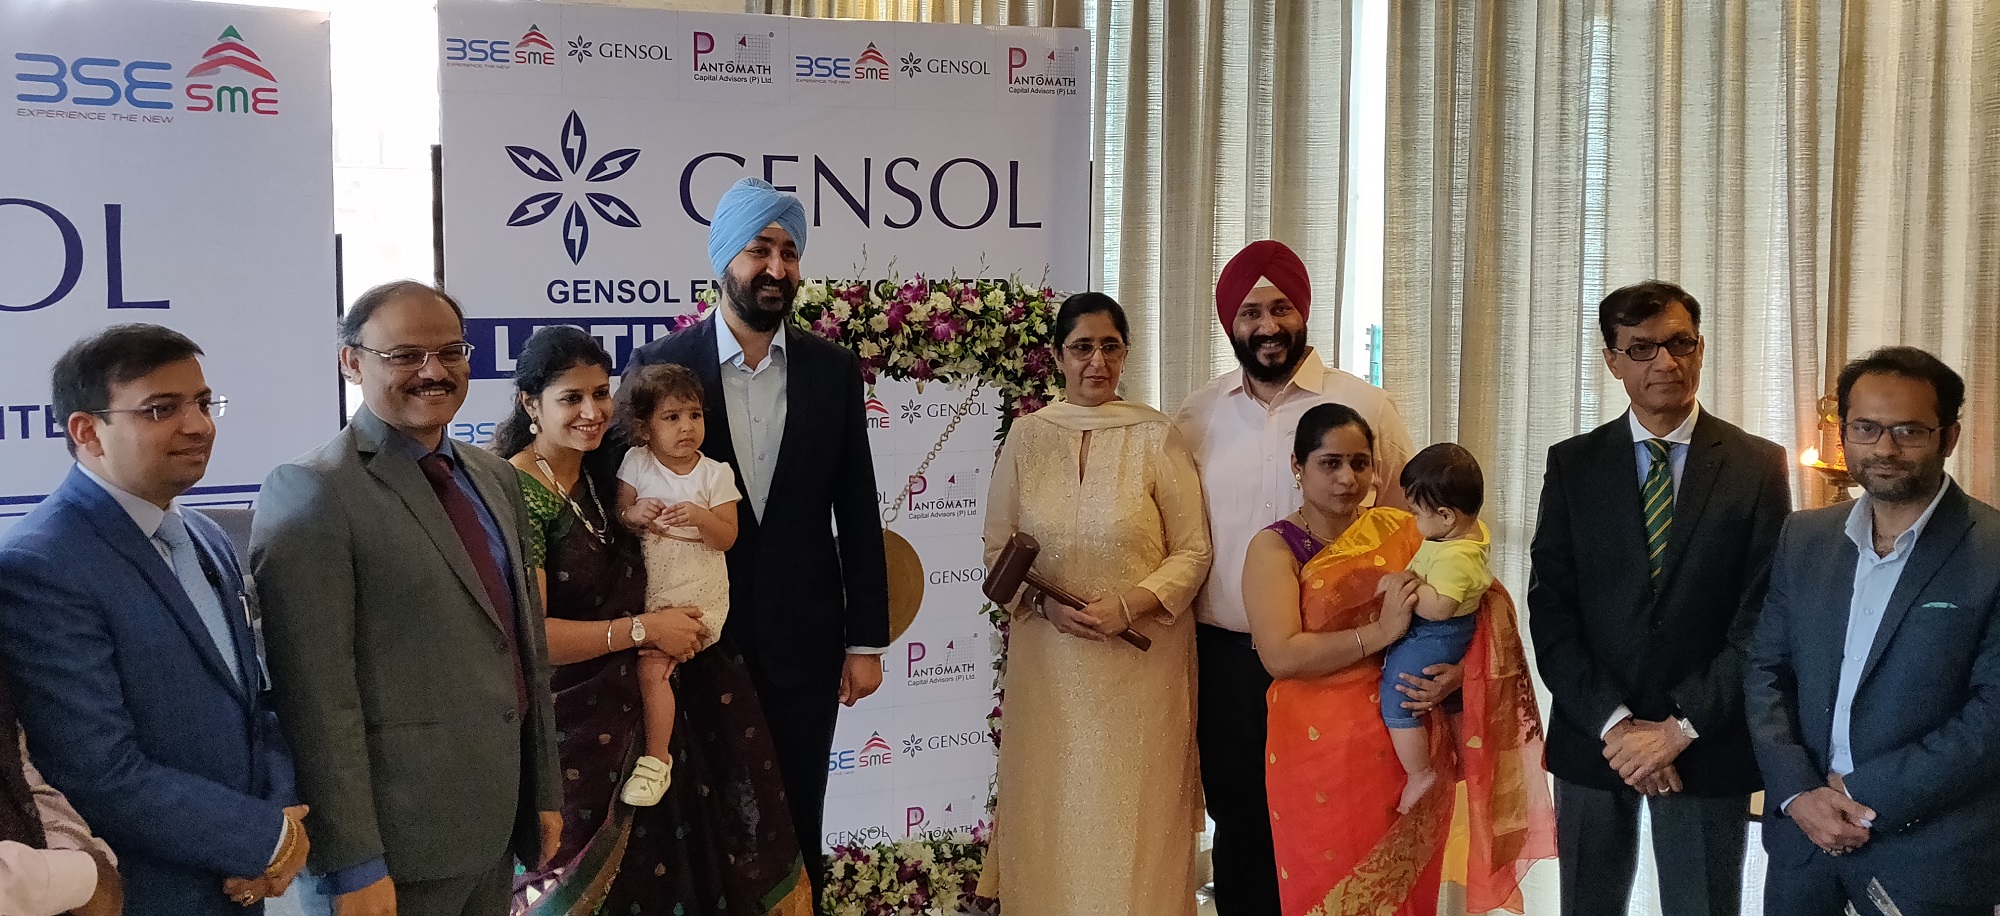 Management of Gensol Engineering Ltd., Mr. Anmol Singh Jaggi (MD & Chairman) and Mr. Puneet Singh Jaggi (Director) with family member were present at the Gensol Engineering Ltd. listing ceremony held today at the BSE, Ahmedabad.-Photo By GPN 